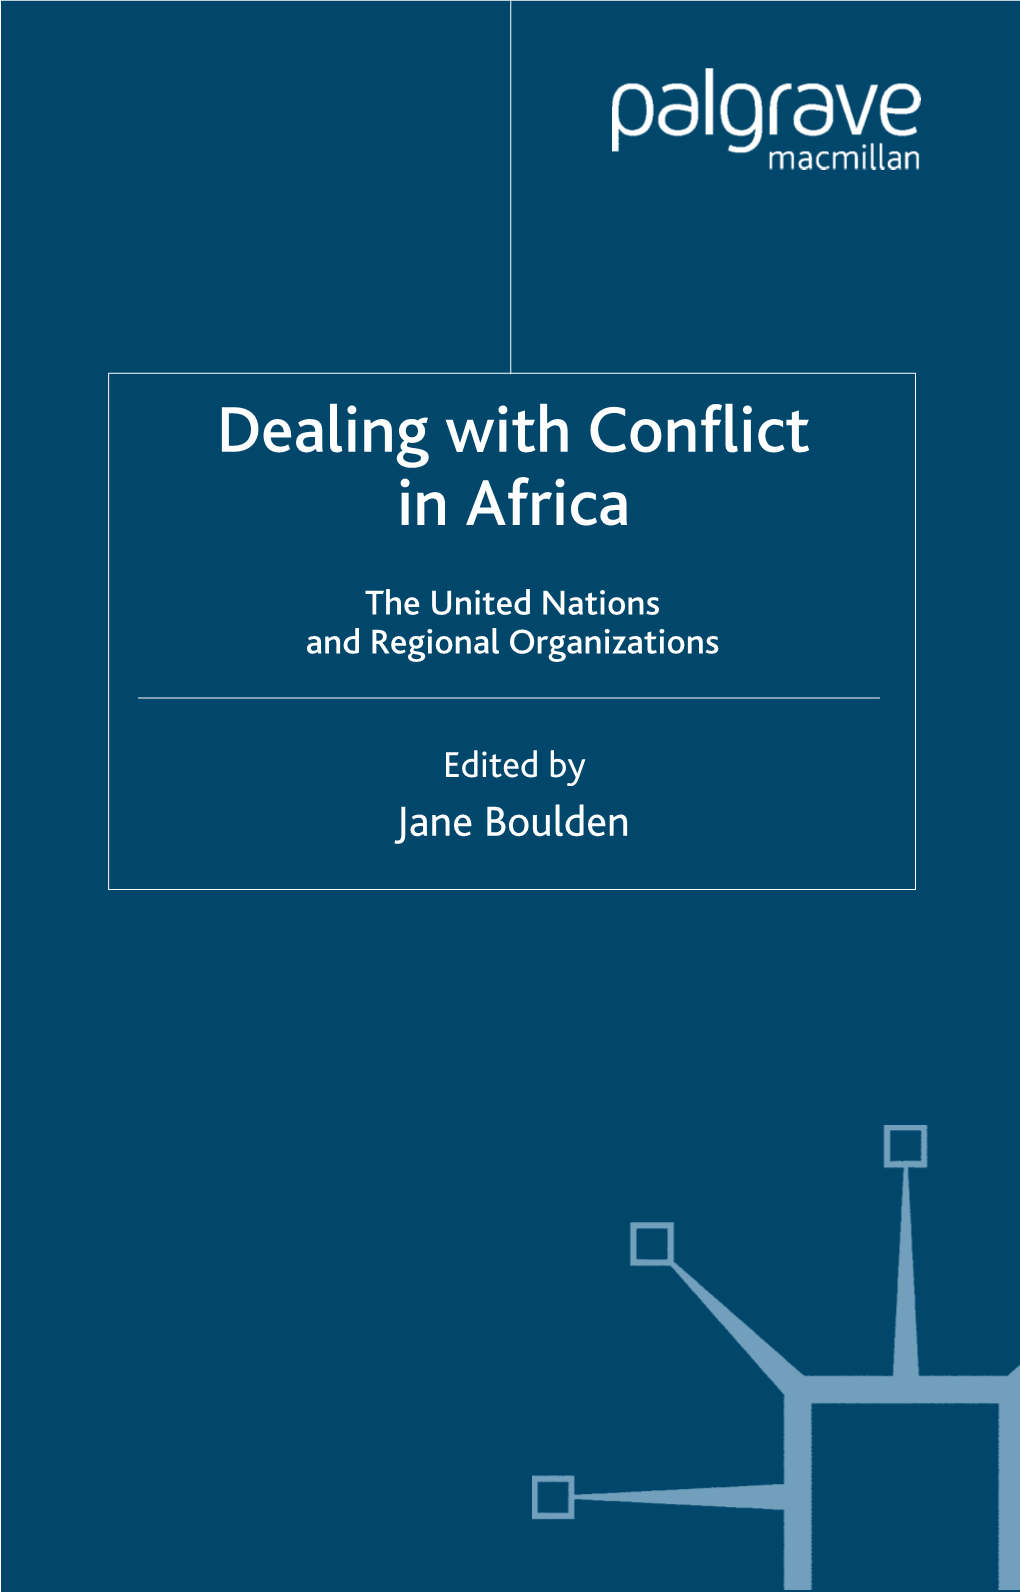 Dealing with Conflict in Africa: the United Nations and Regional Organizations